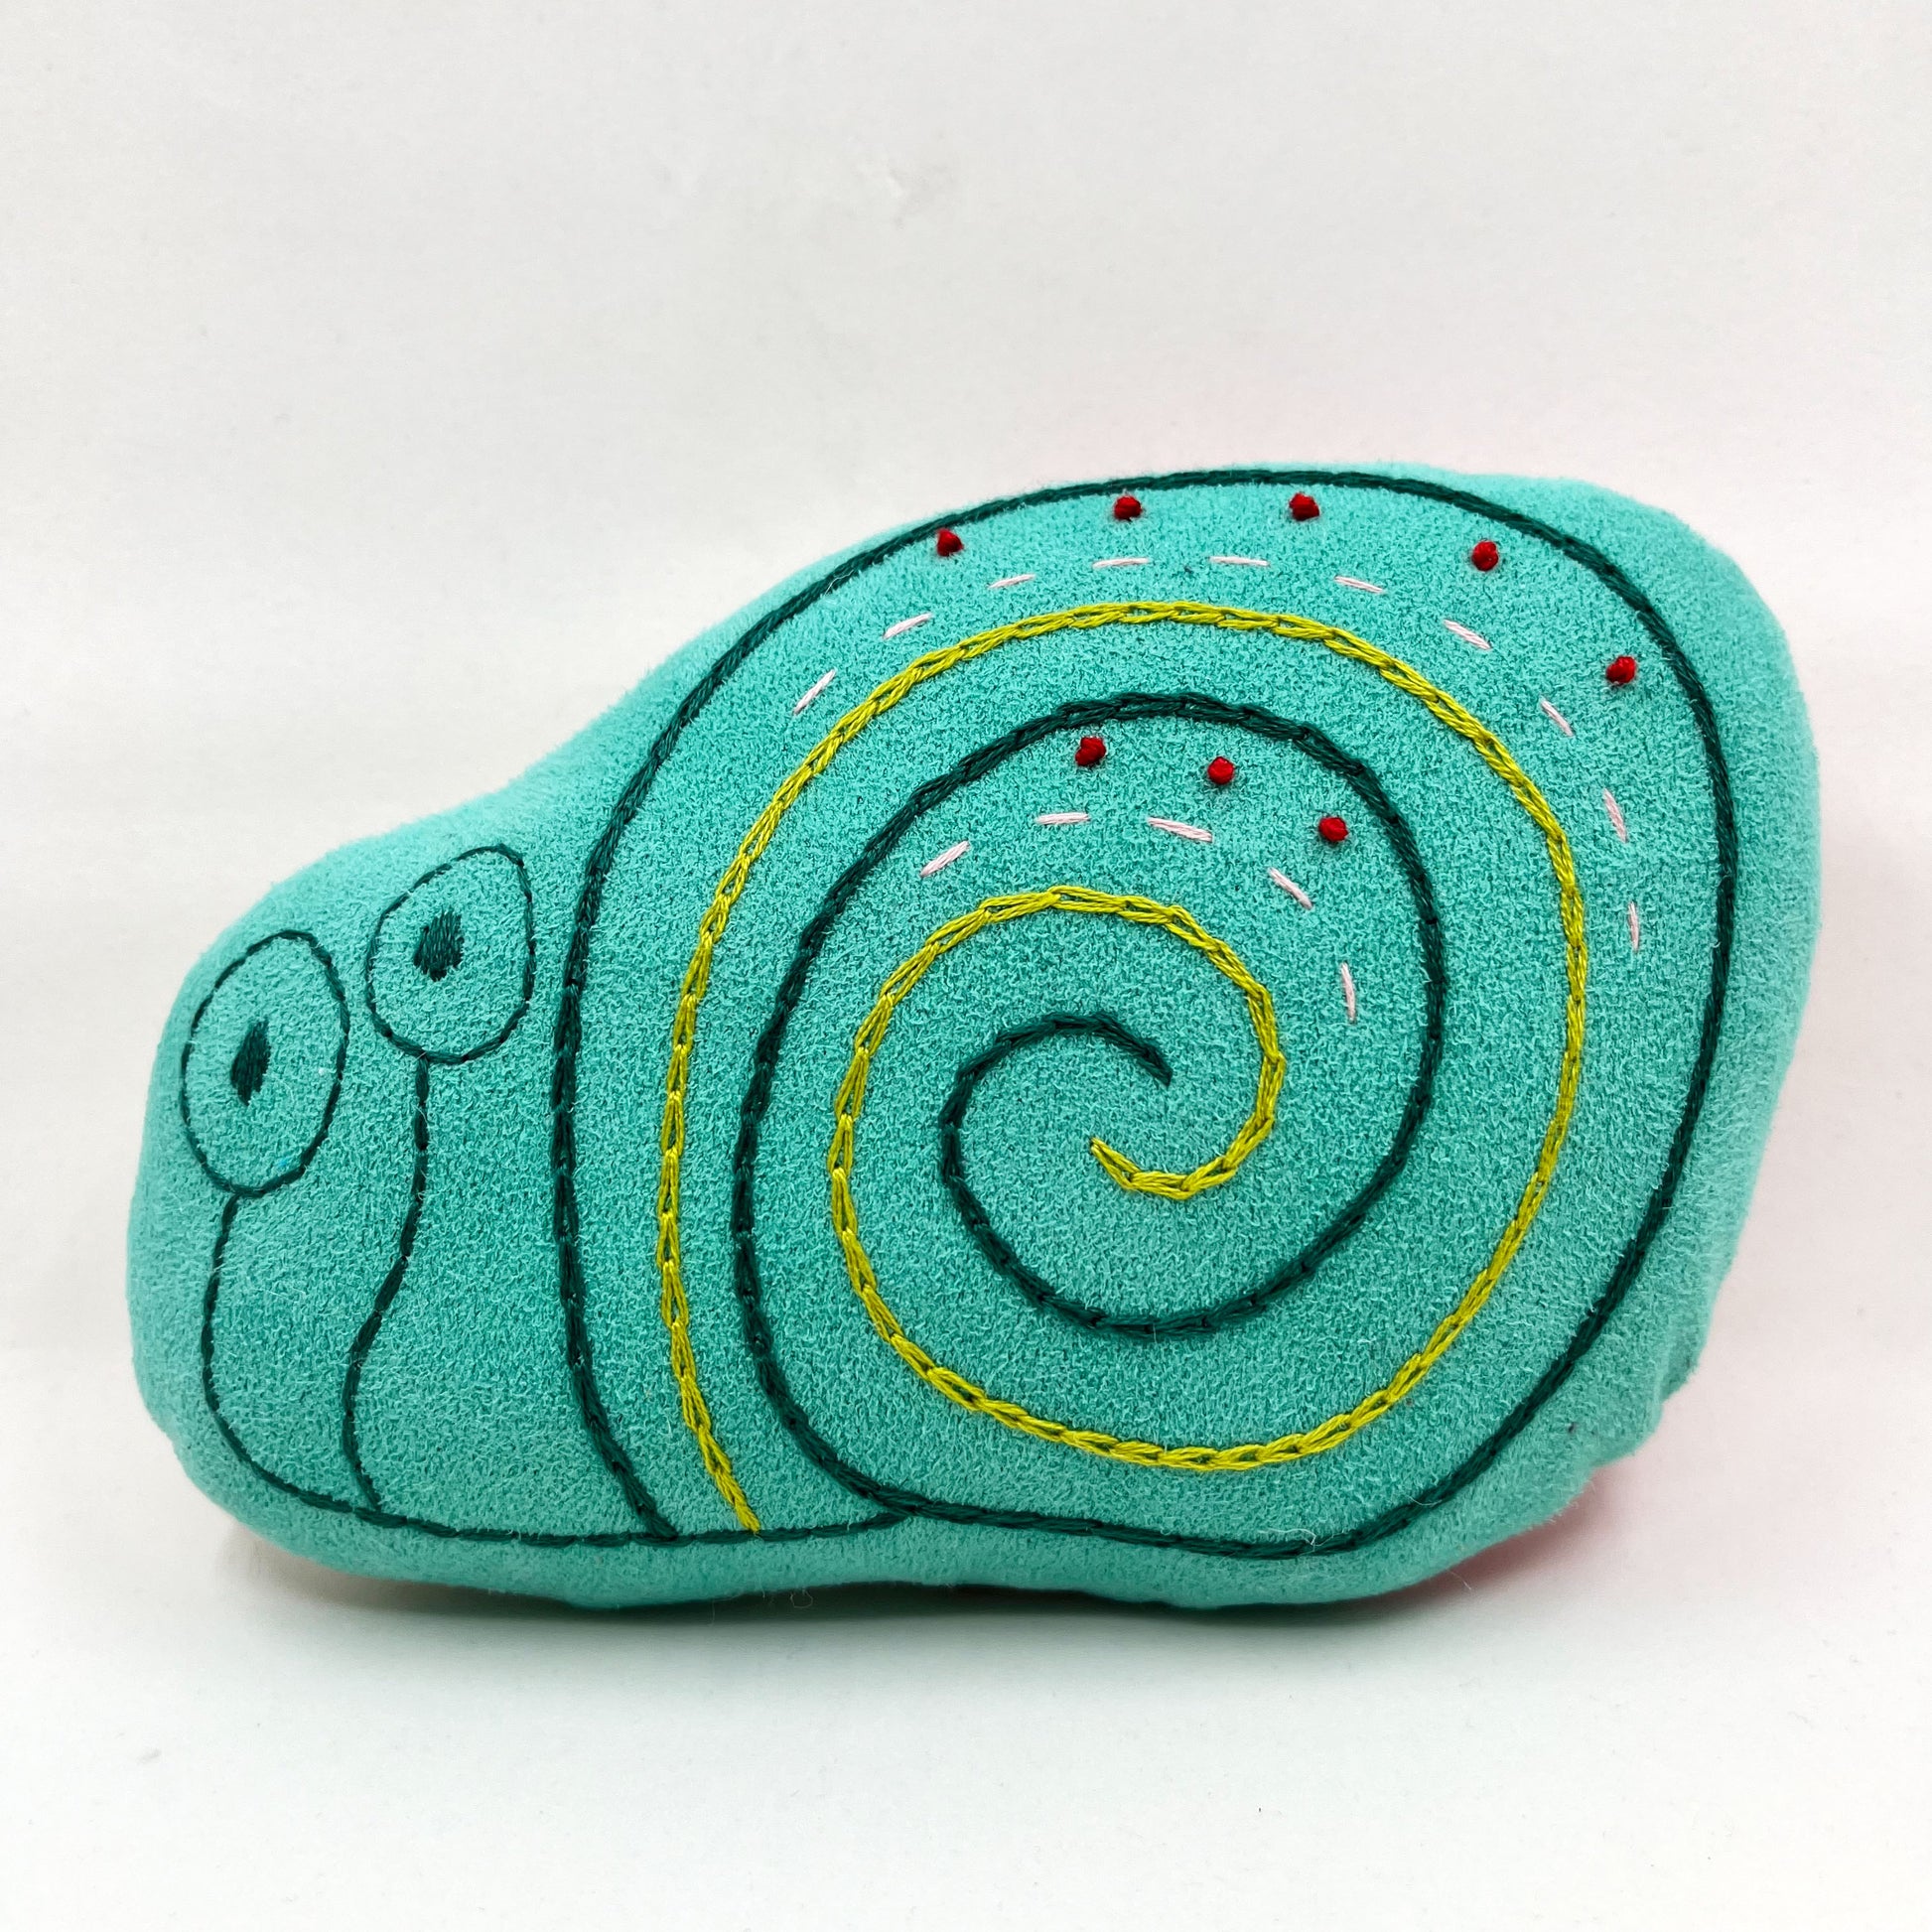 a colorfully hand embroidered stuffed pillow animal of a snail in seafoam green fabric on a white background